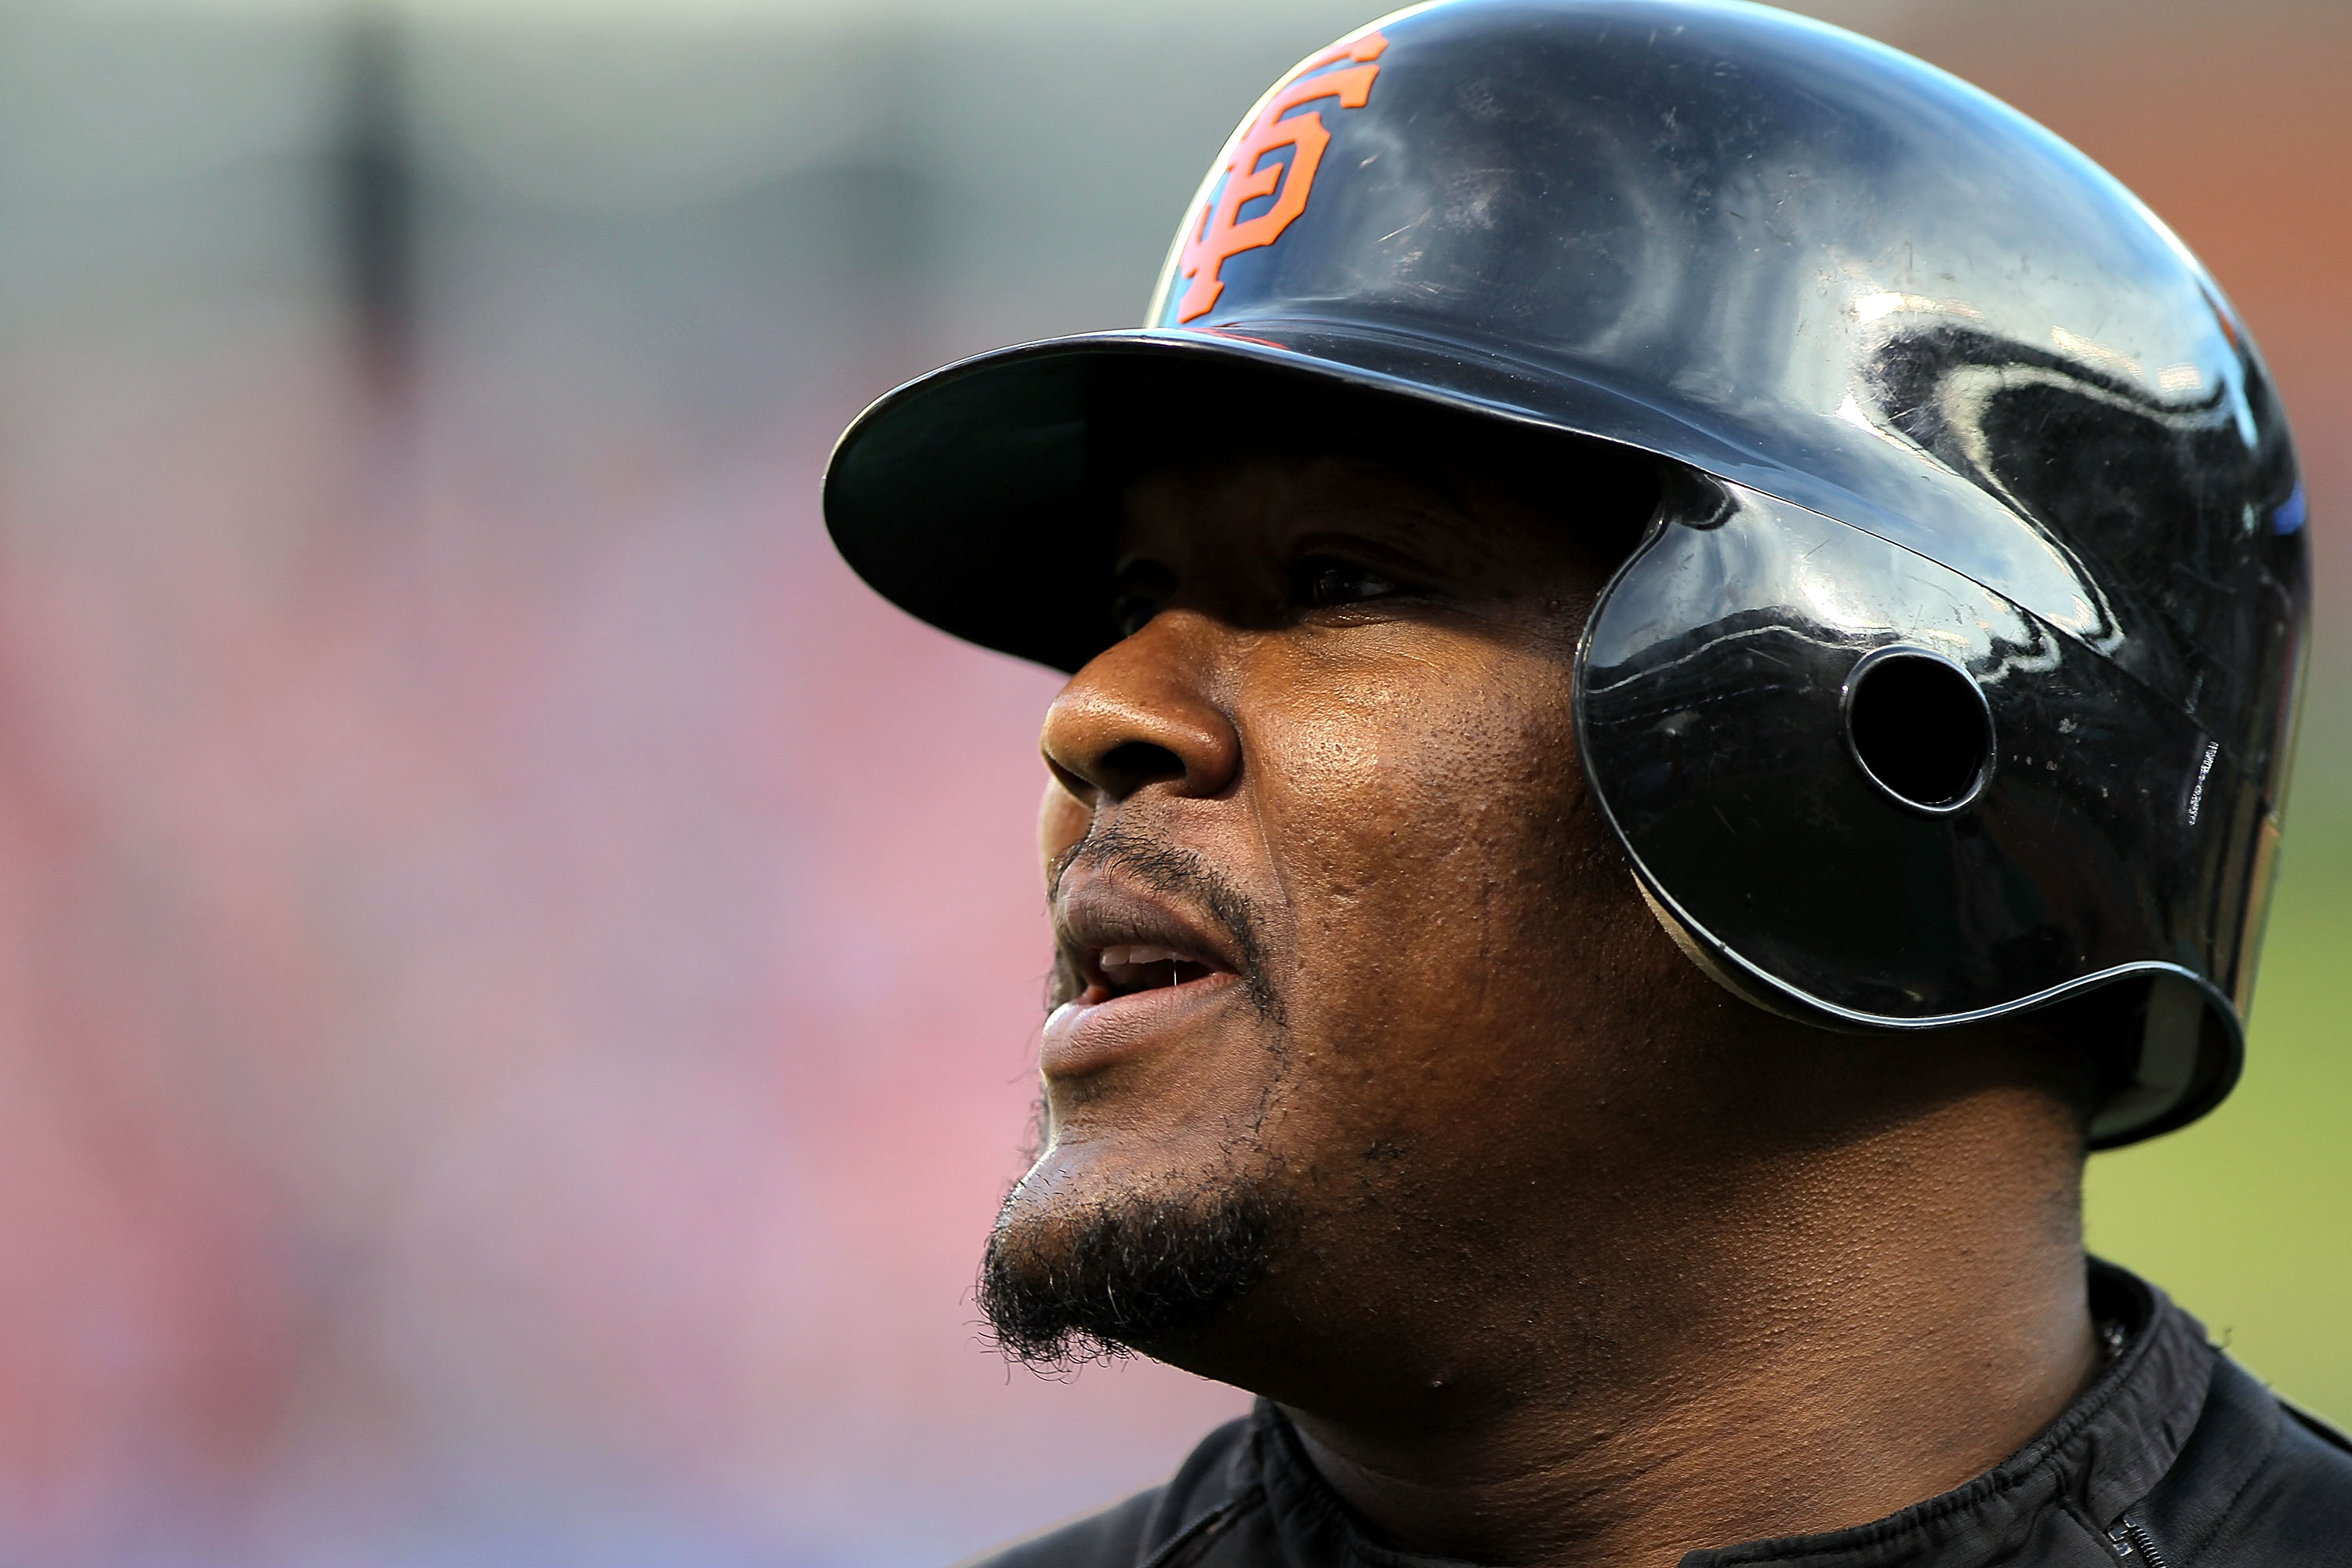 ARLINGTON, TX - NOVEMBER 01:  Juan Uribe #5 of the San Francisco Giants looks on during batting practice against the Texas Rangers in Game Five of the 2010 MLB World Series at Rangers Ballpark in Arlington on November 1, 2010 in Arlington, Texas.  (Photo